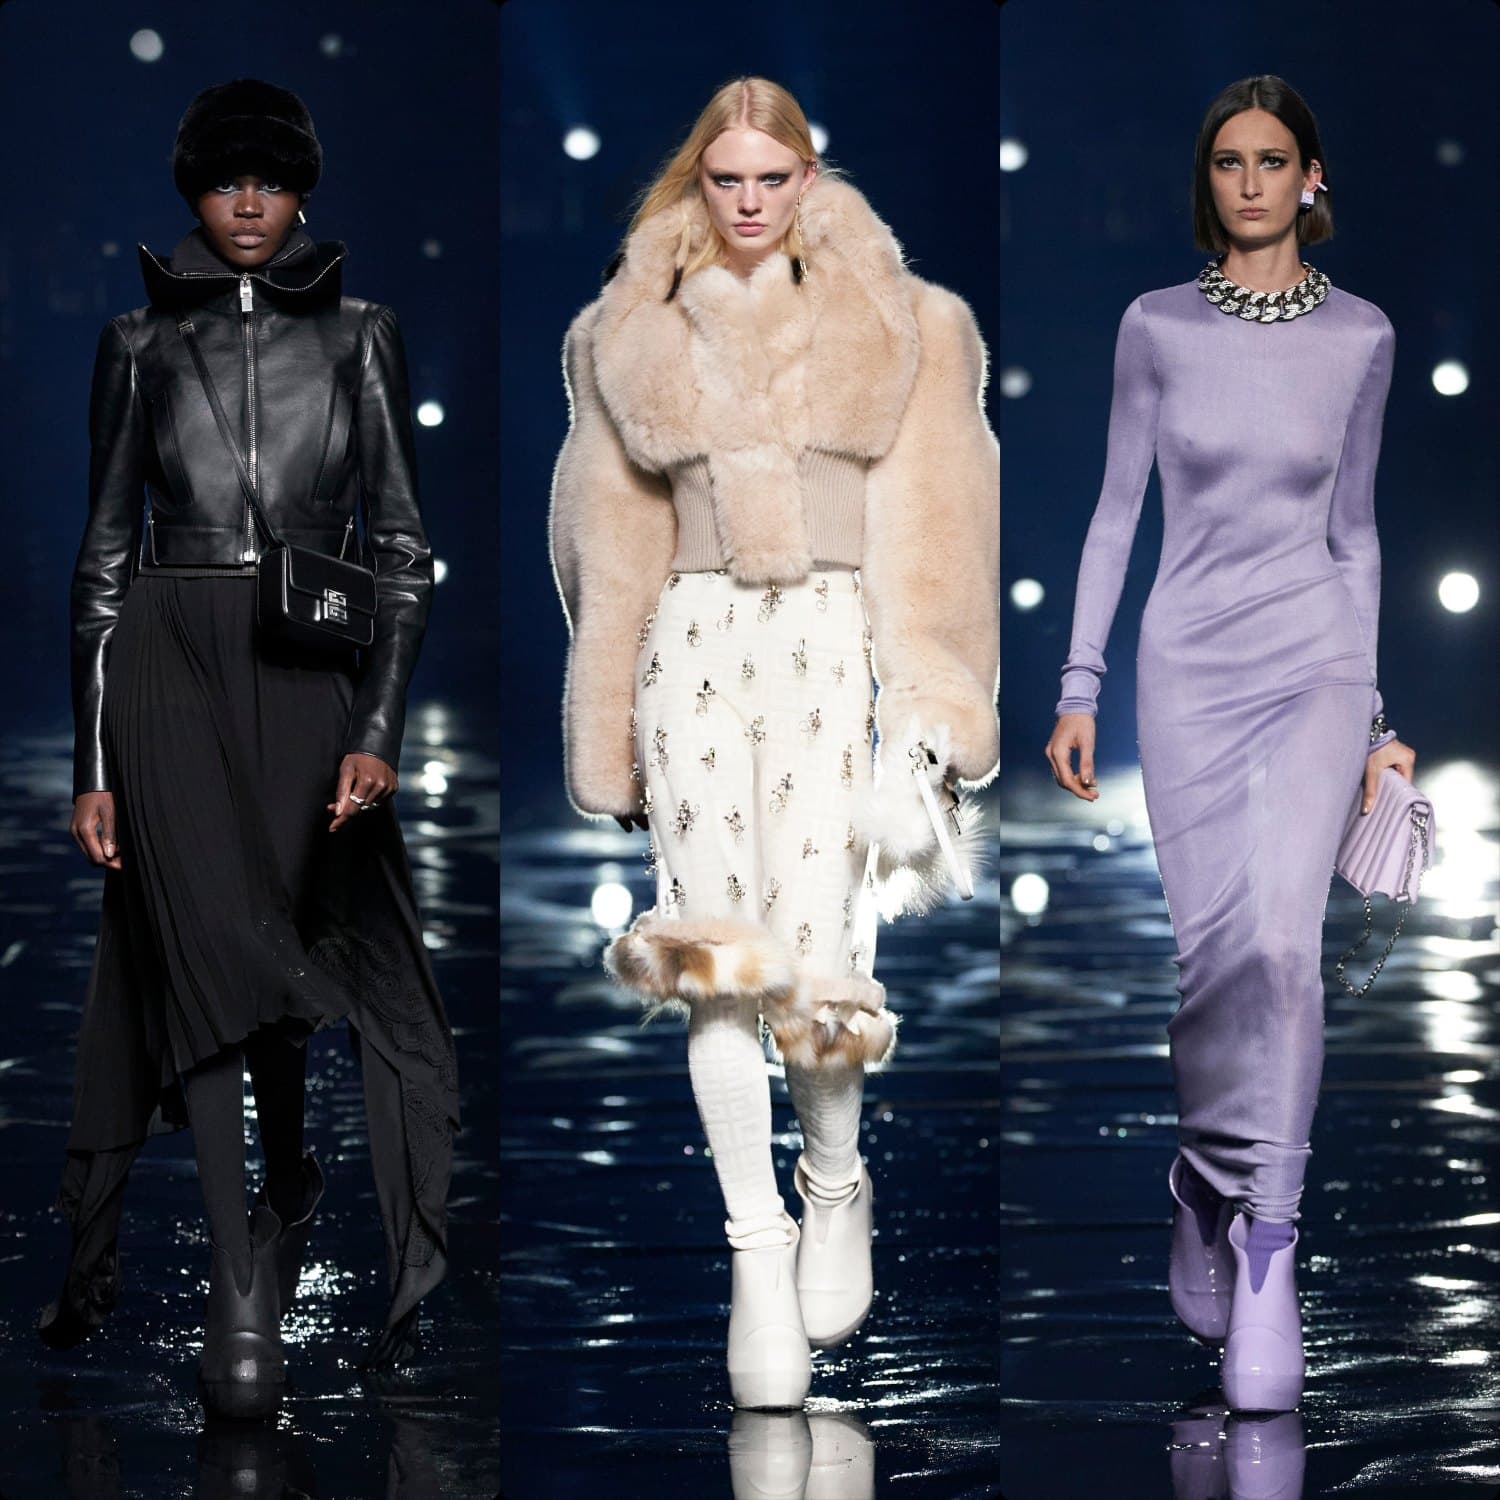 Givenchy Fall Winter 2021-2022 Paris - RUNWAY MAGAZINE ® Collections